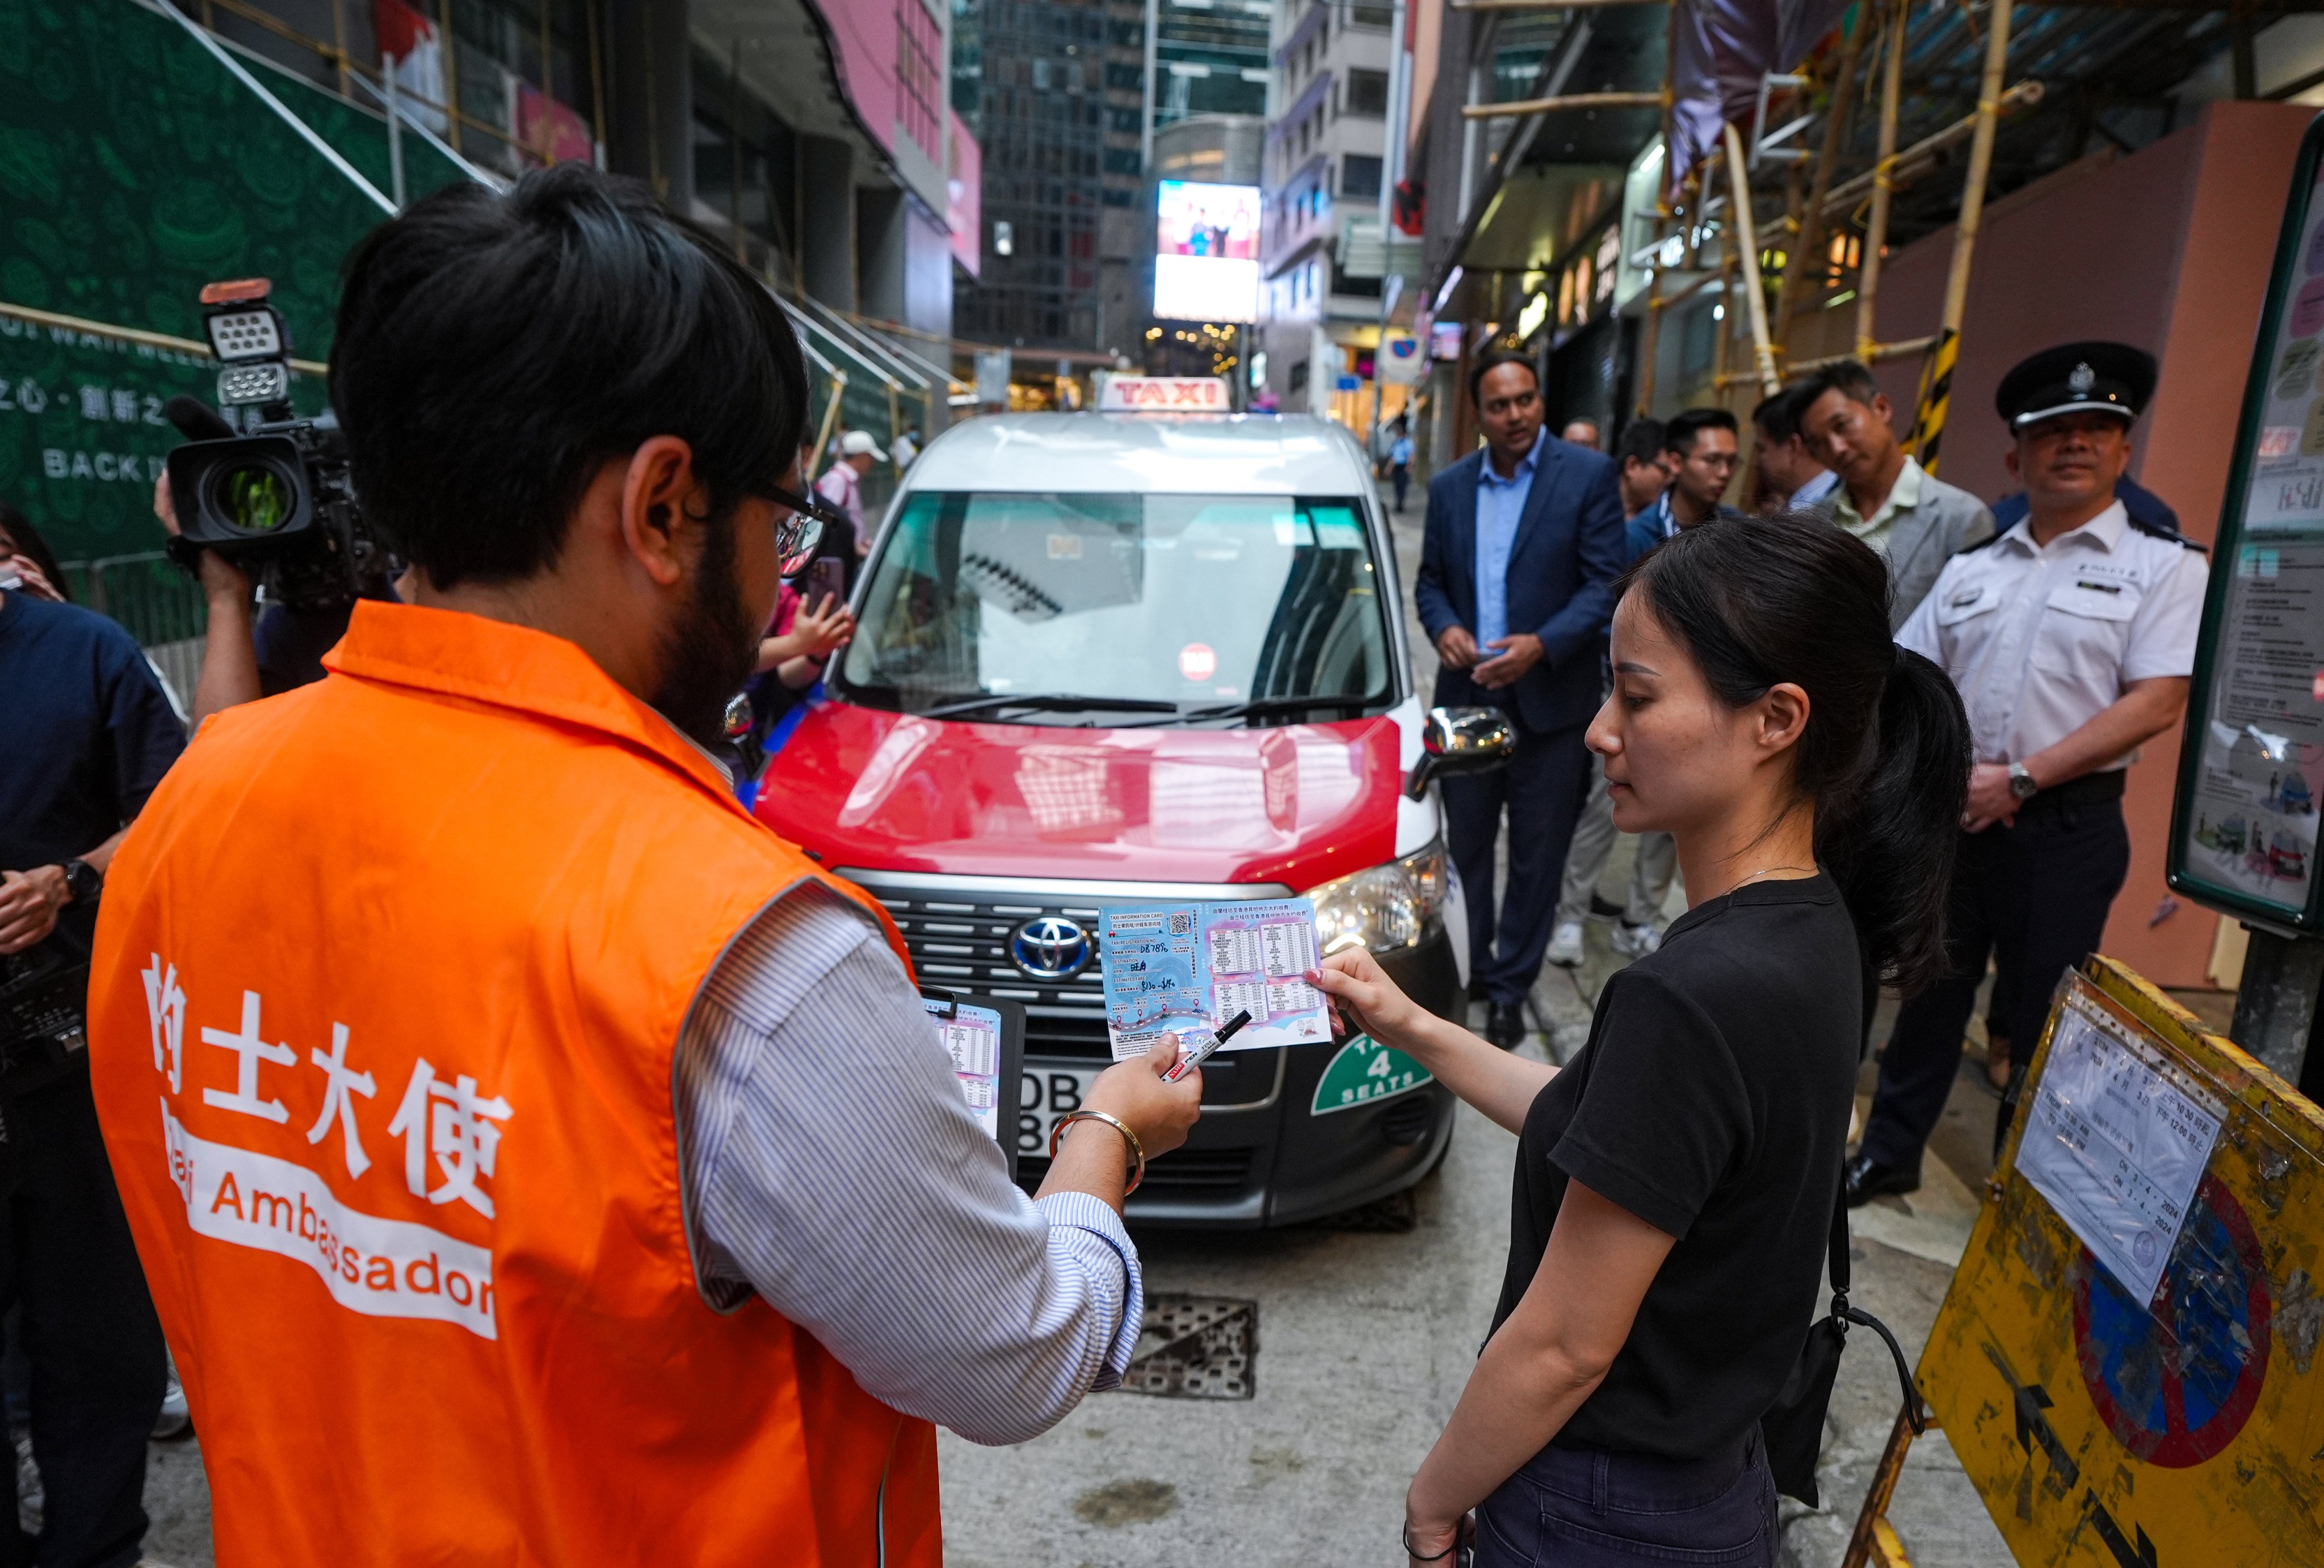 “Taxi ambassadors” will help passengers in Lan Kwai Fong fill out information about their rides. Photo: Eugene Lee